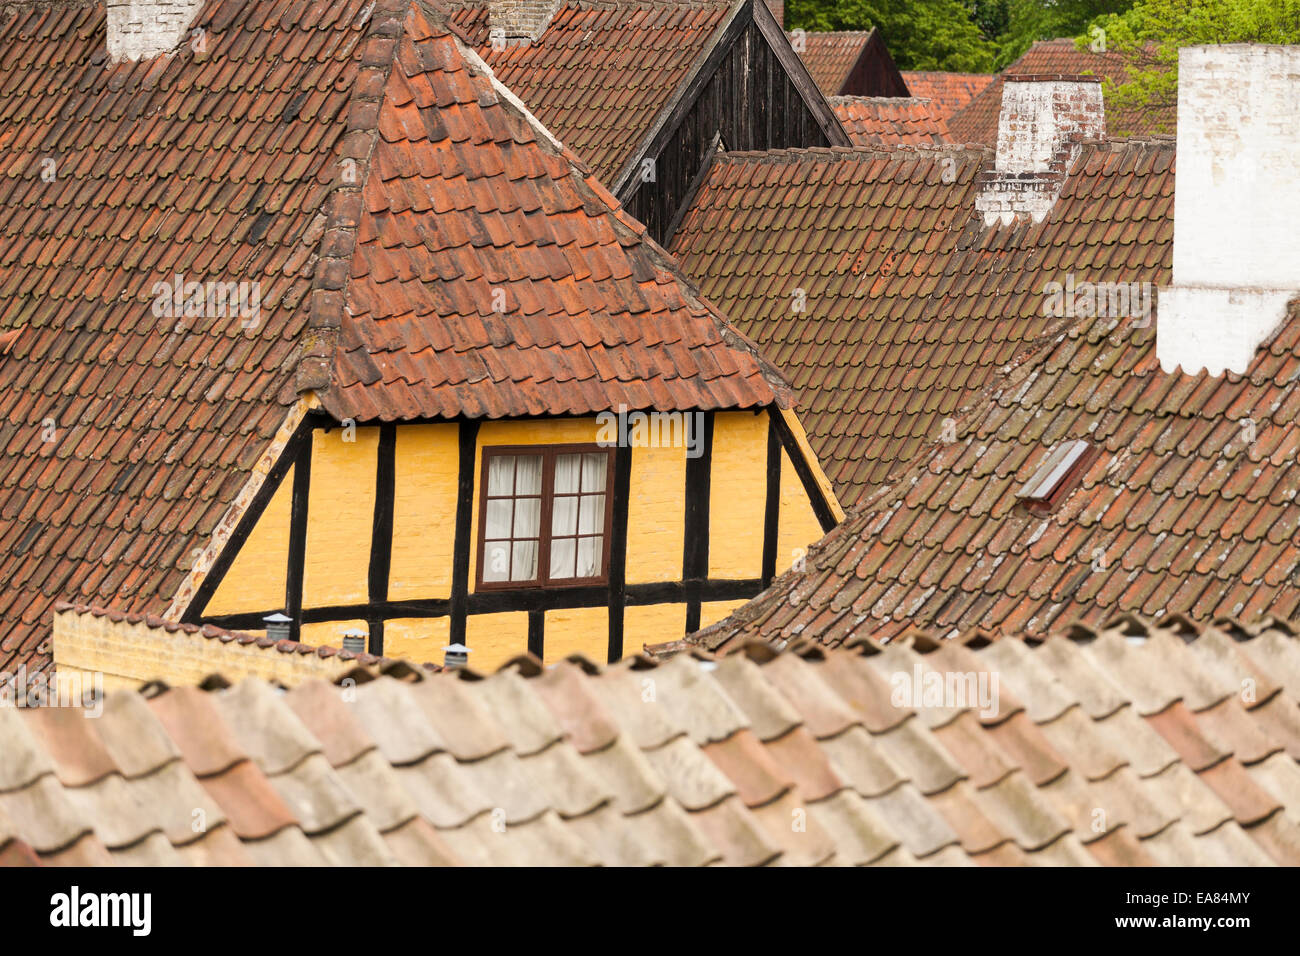 Tile Rooftops in Aarhus. The tile rooftops form an intersecting pattern in the old town of Aarhus in Denmark. Stock Photo